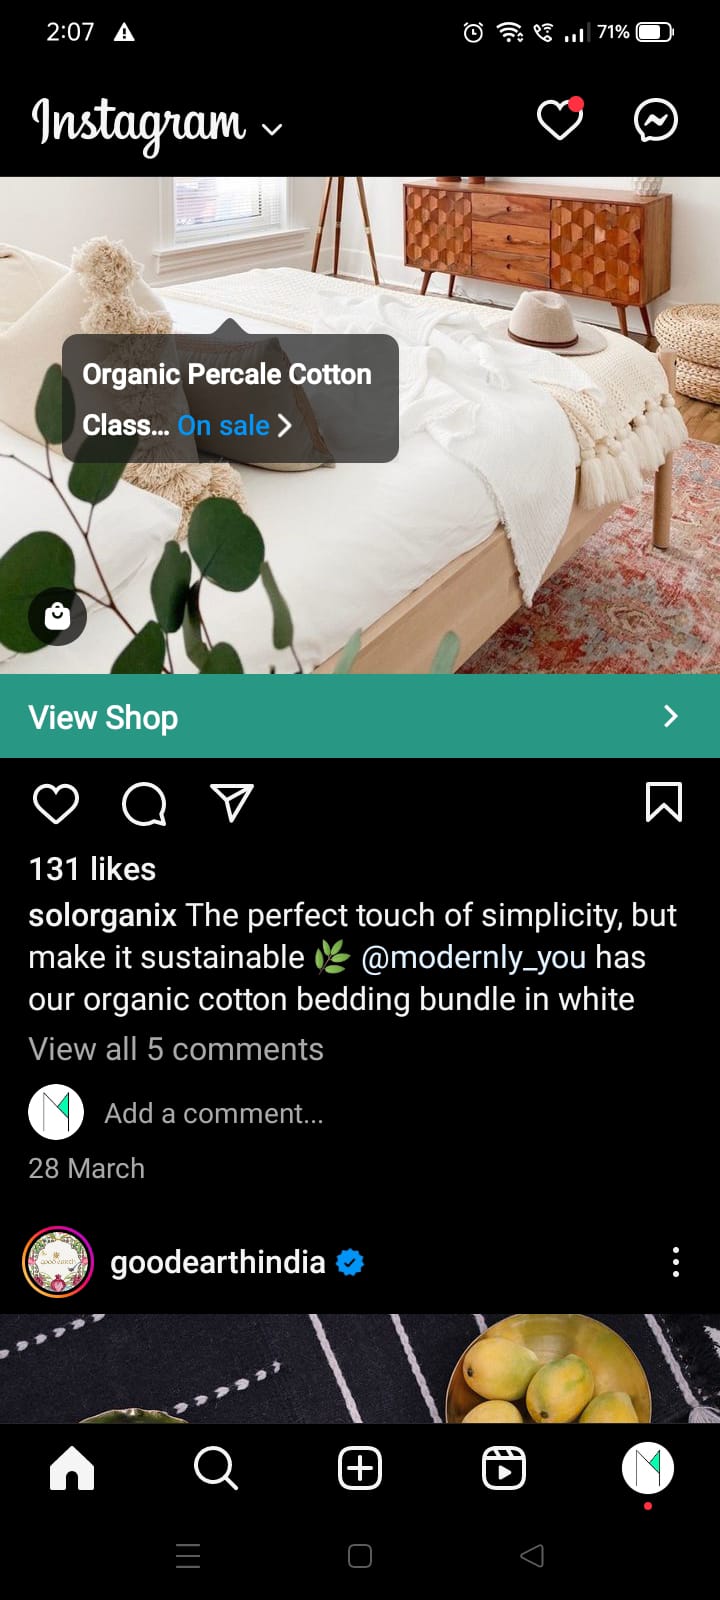 Instagram home-screen interface